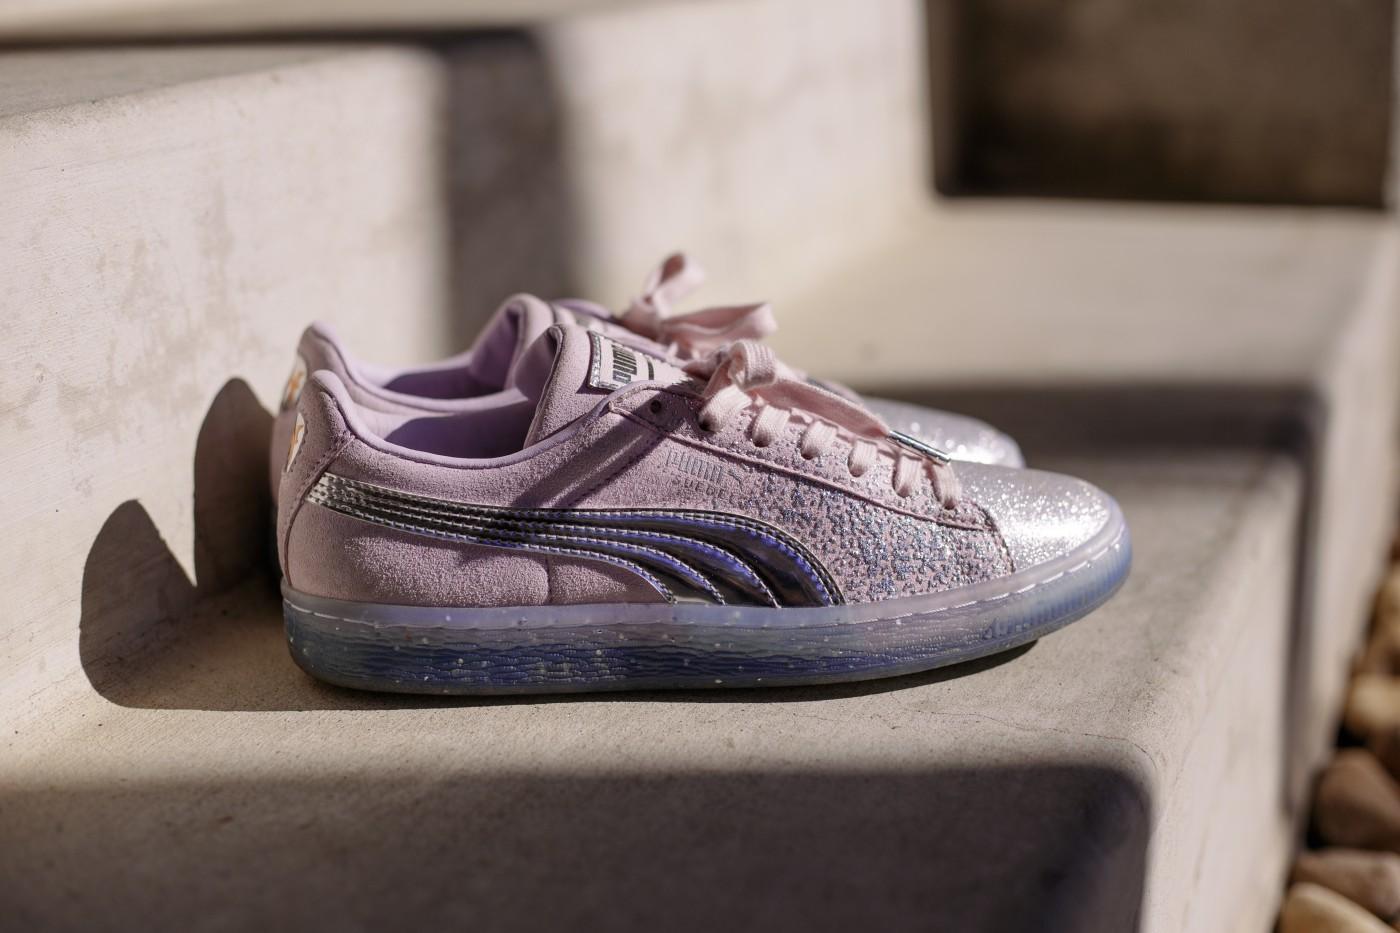 The New Puma x Sophia Webster Capsule Is a Pastel Glitter Party